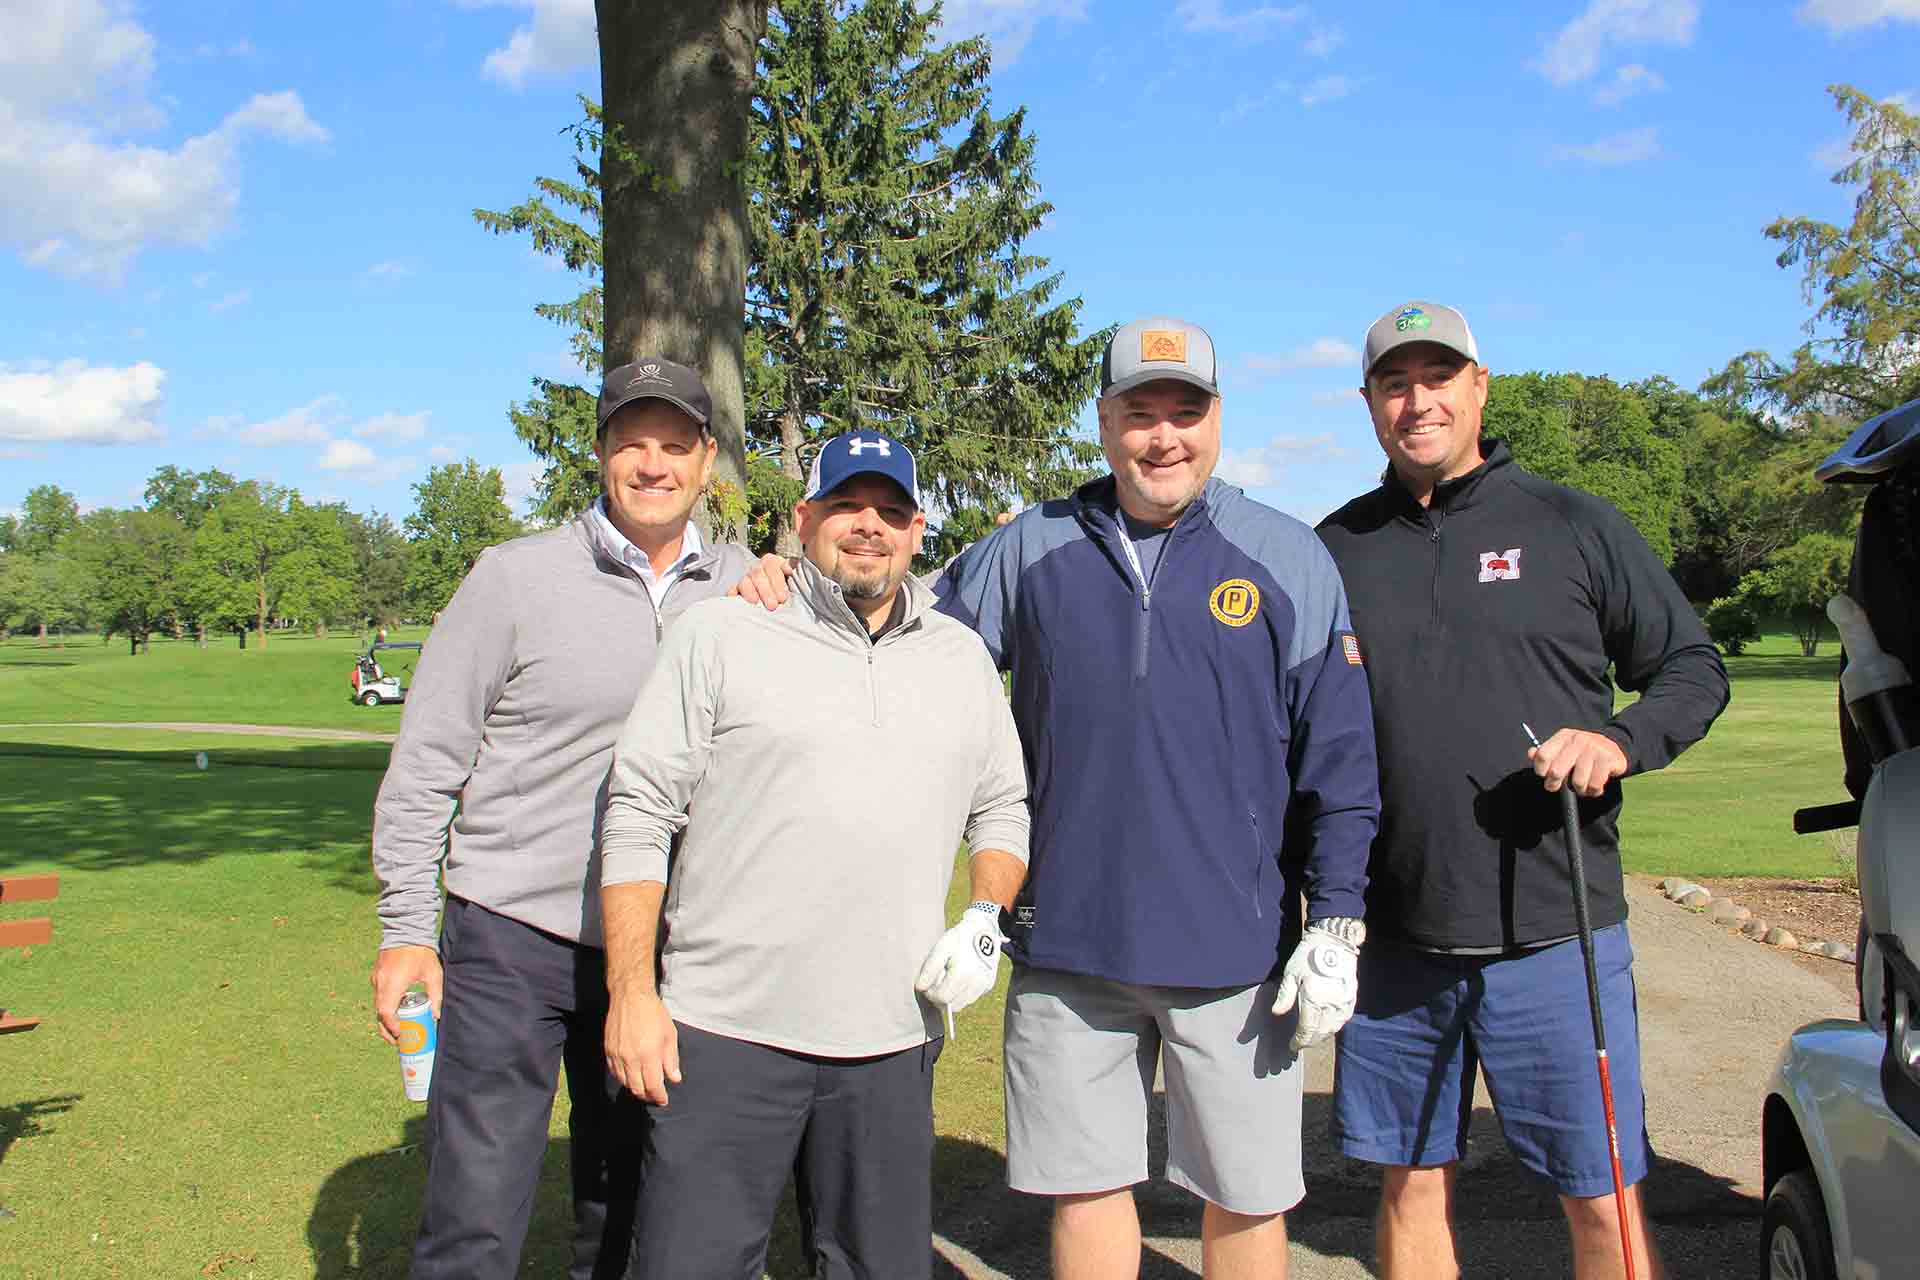 2022-Endowment-Golf-Classic-four-people-smile-by-tree